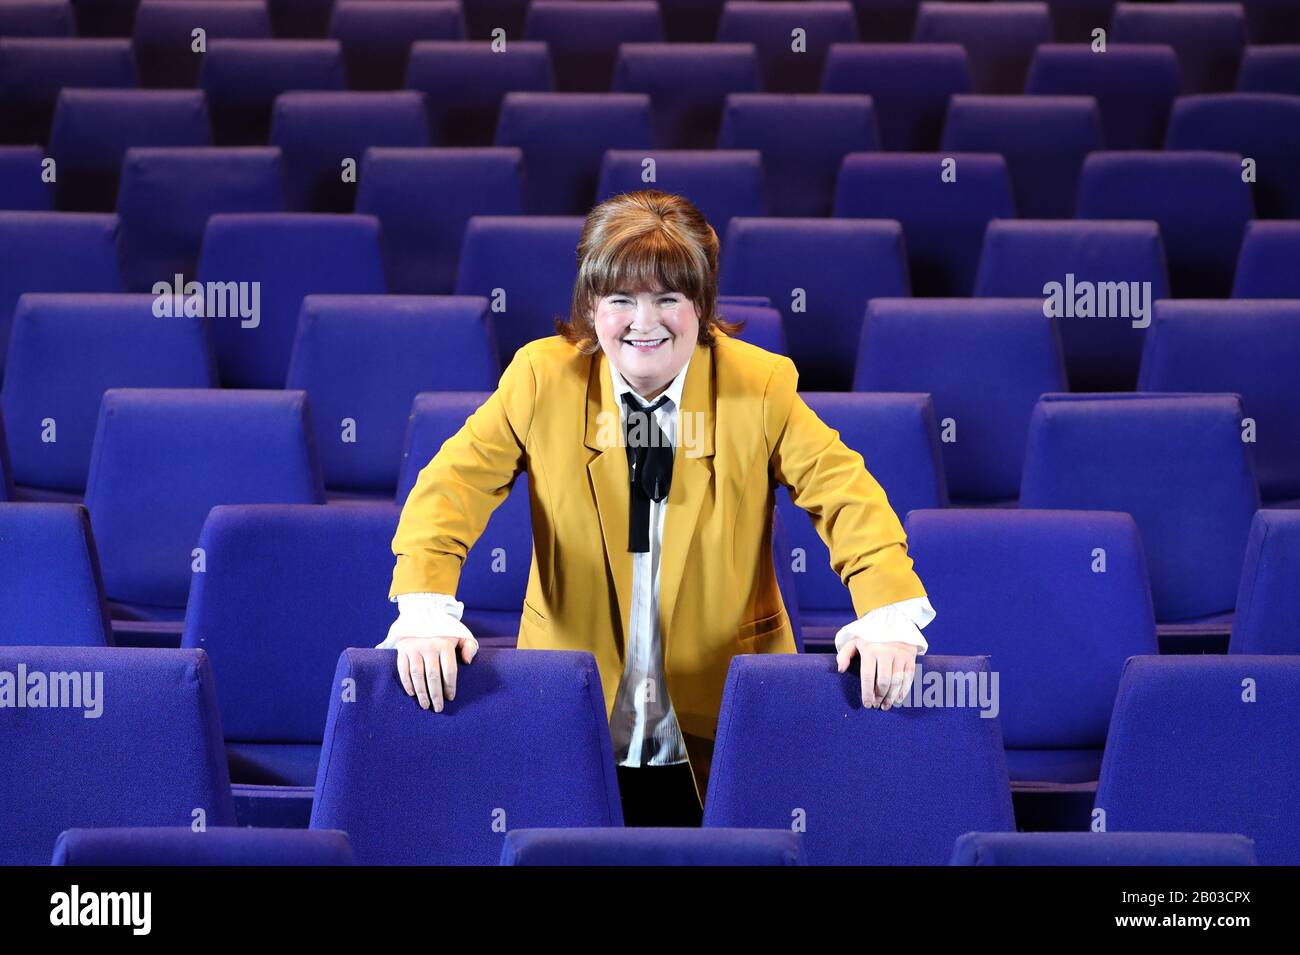 Susan Boyle at the SEC Armadillo in Glasgow to promote her 'Ten Tour', after she astonished the judges and audience at Britain's Got Talent during an audition at the Armadillo ten years ago. The tour starts on 4th March when she returns to the venue. Stock Photo